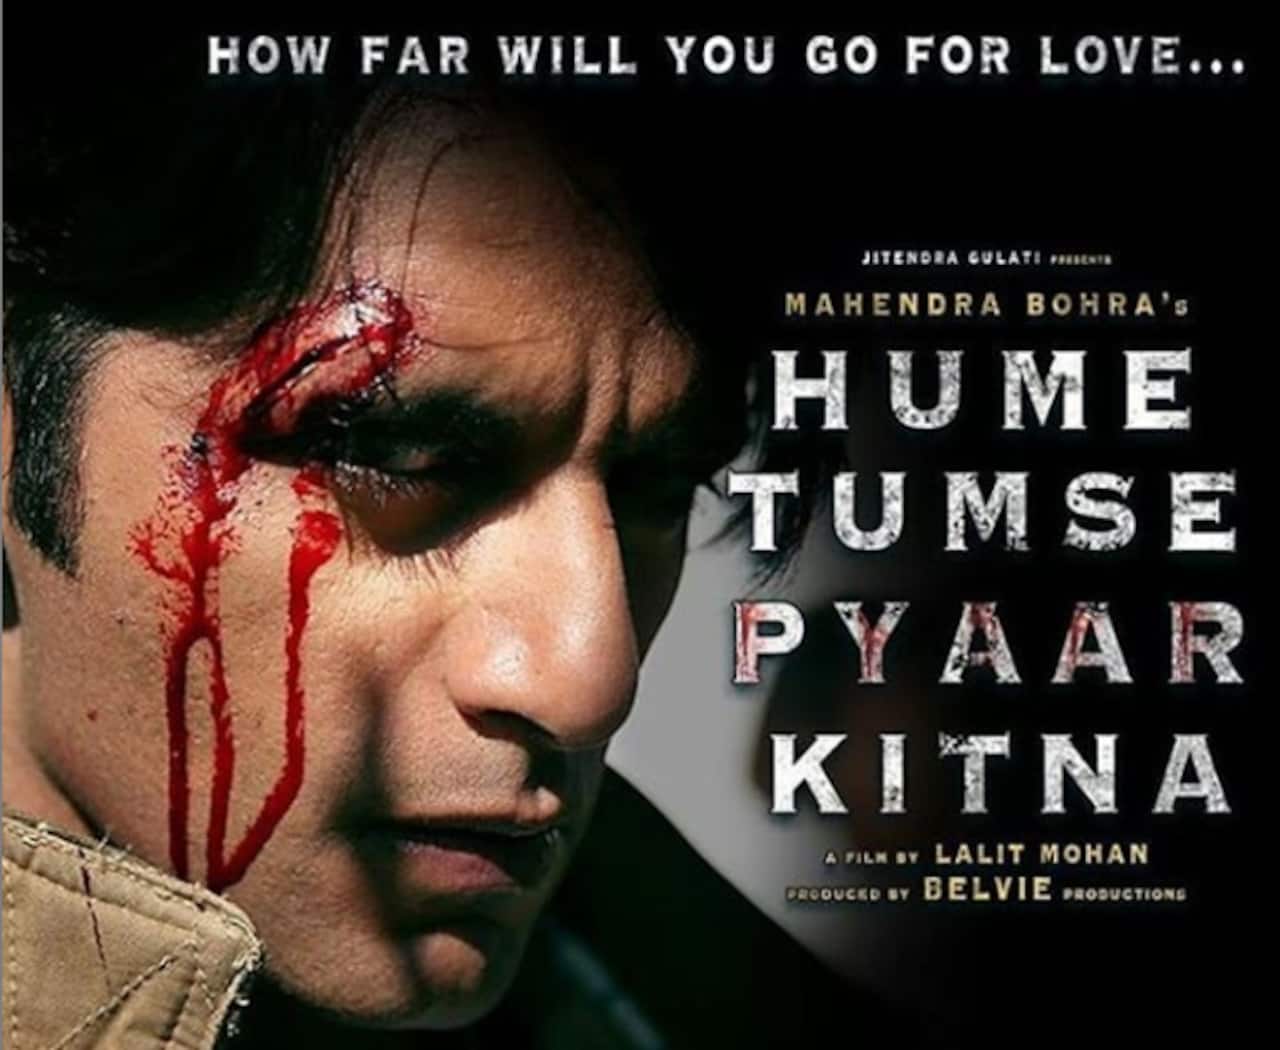 Hume Tumse Pyaar Kitna's trailer resurfaces online after being taken off due to excessive violent content